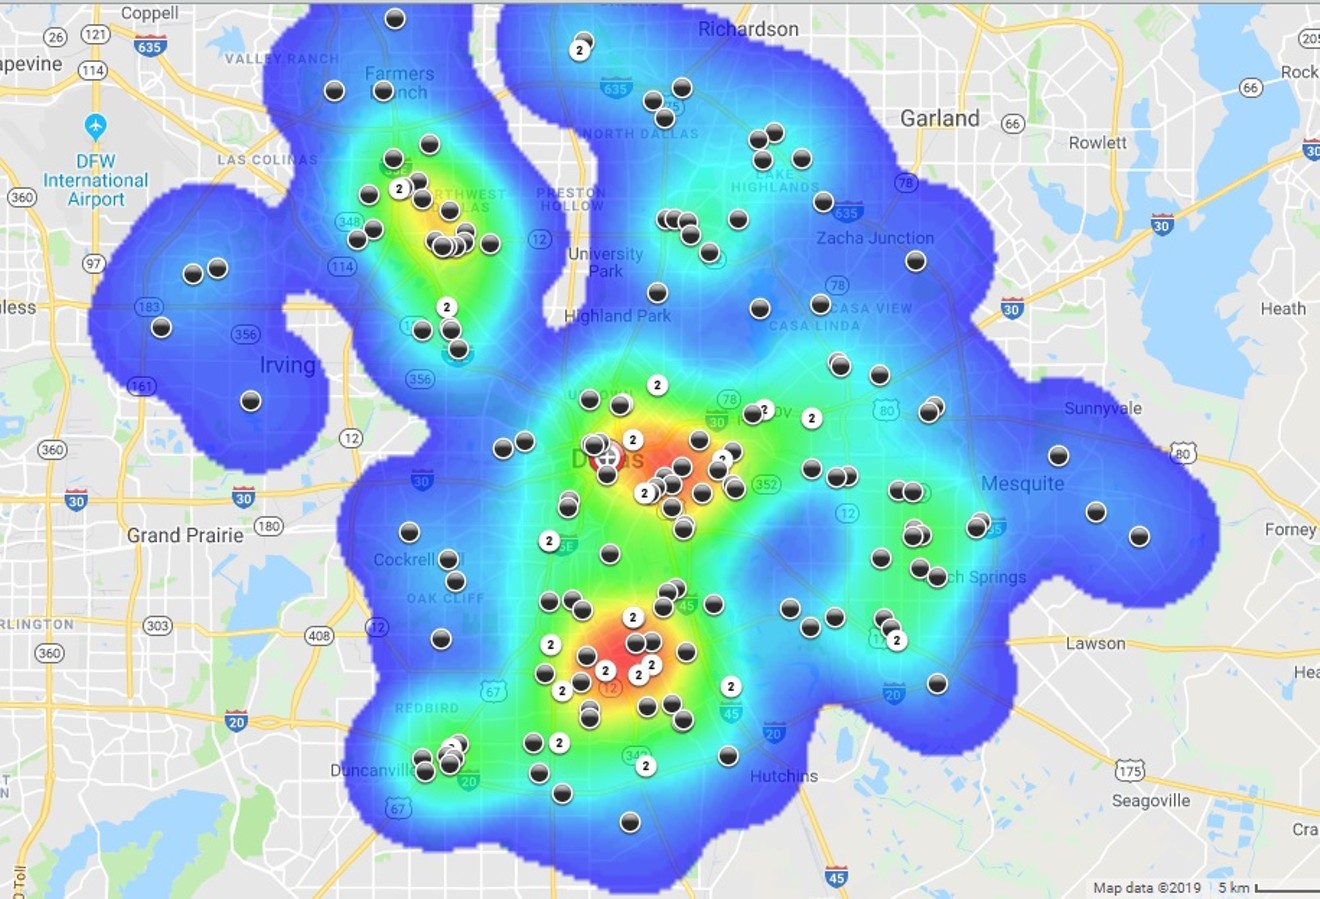 Map shows density of murder incidence in Dallas for the previous 12 months.